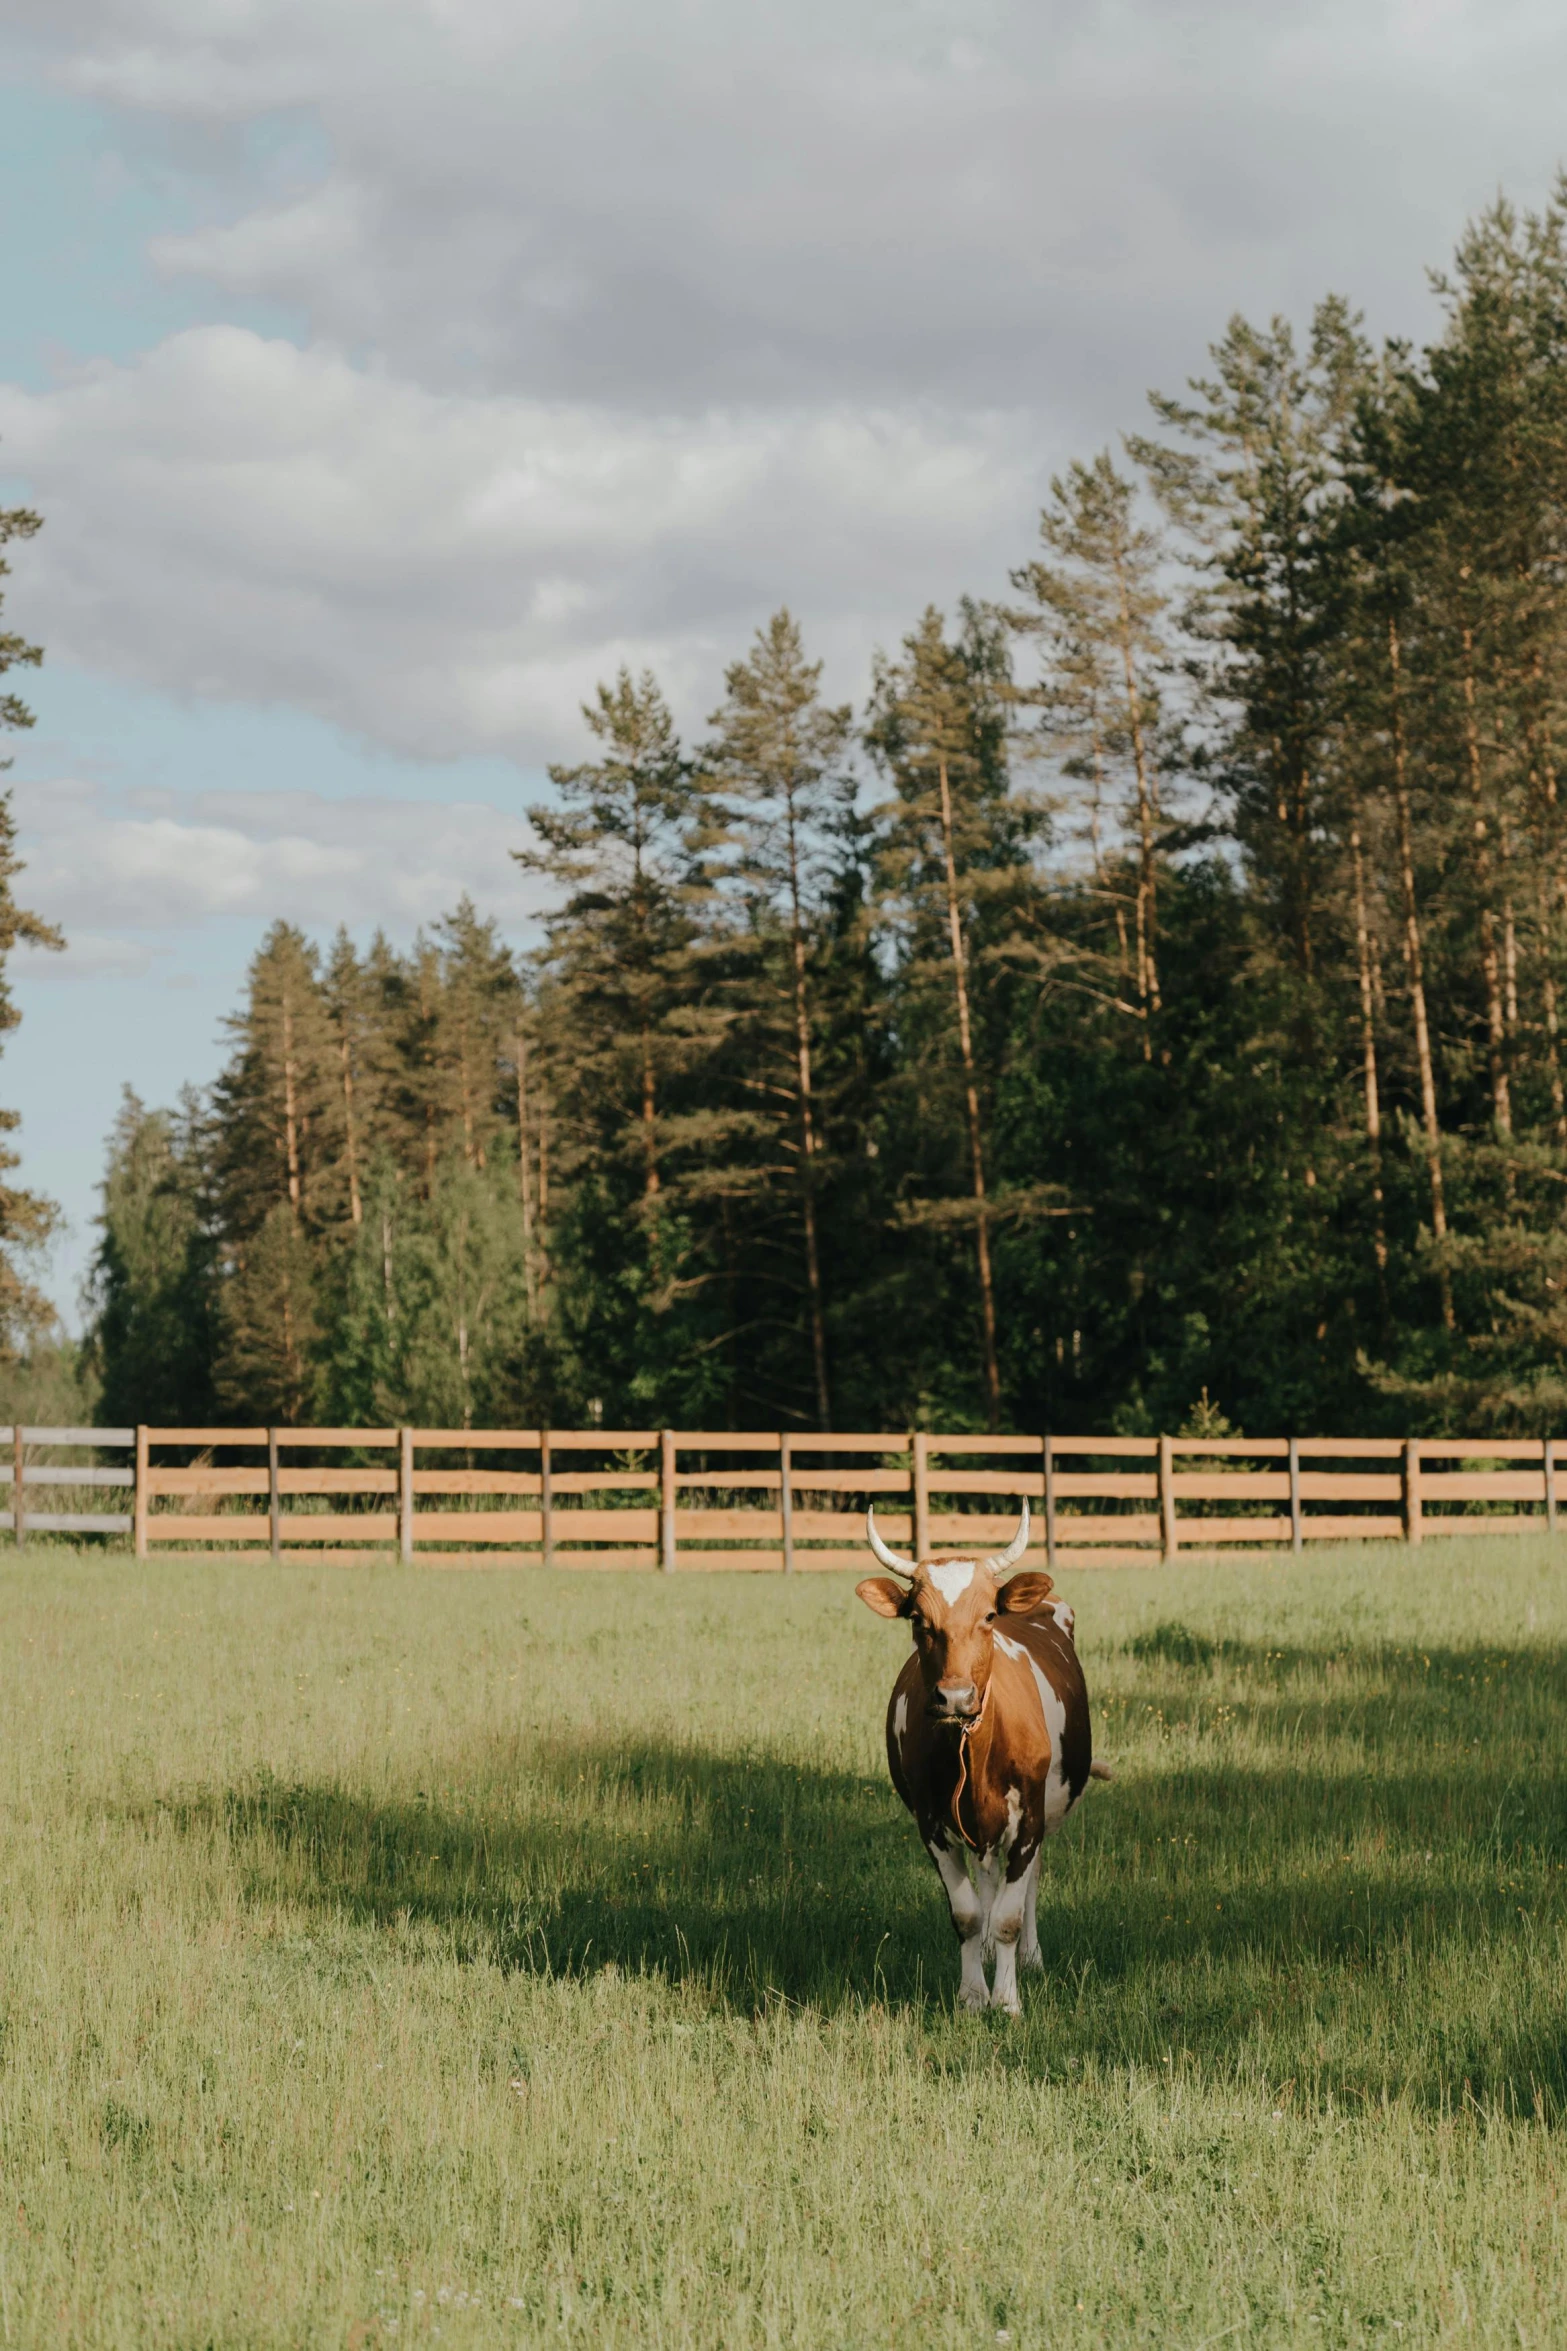 a brown and white cow standing on top of a lush green field, by Jaakko Mattila, unsplash, pine forests, wooden fence, horse is up on its hind legs, instagram story